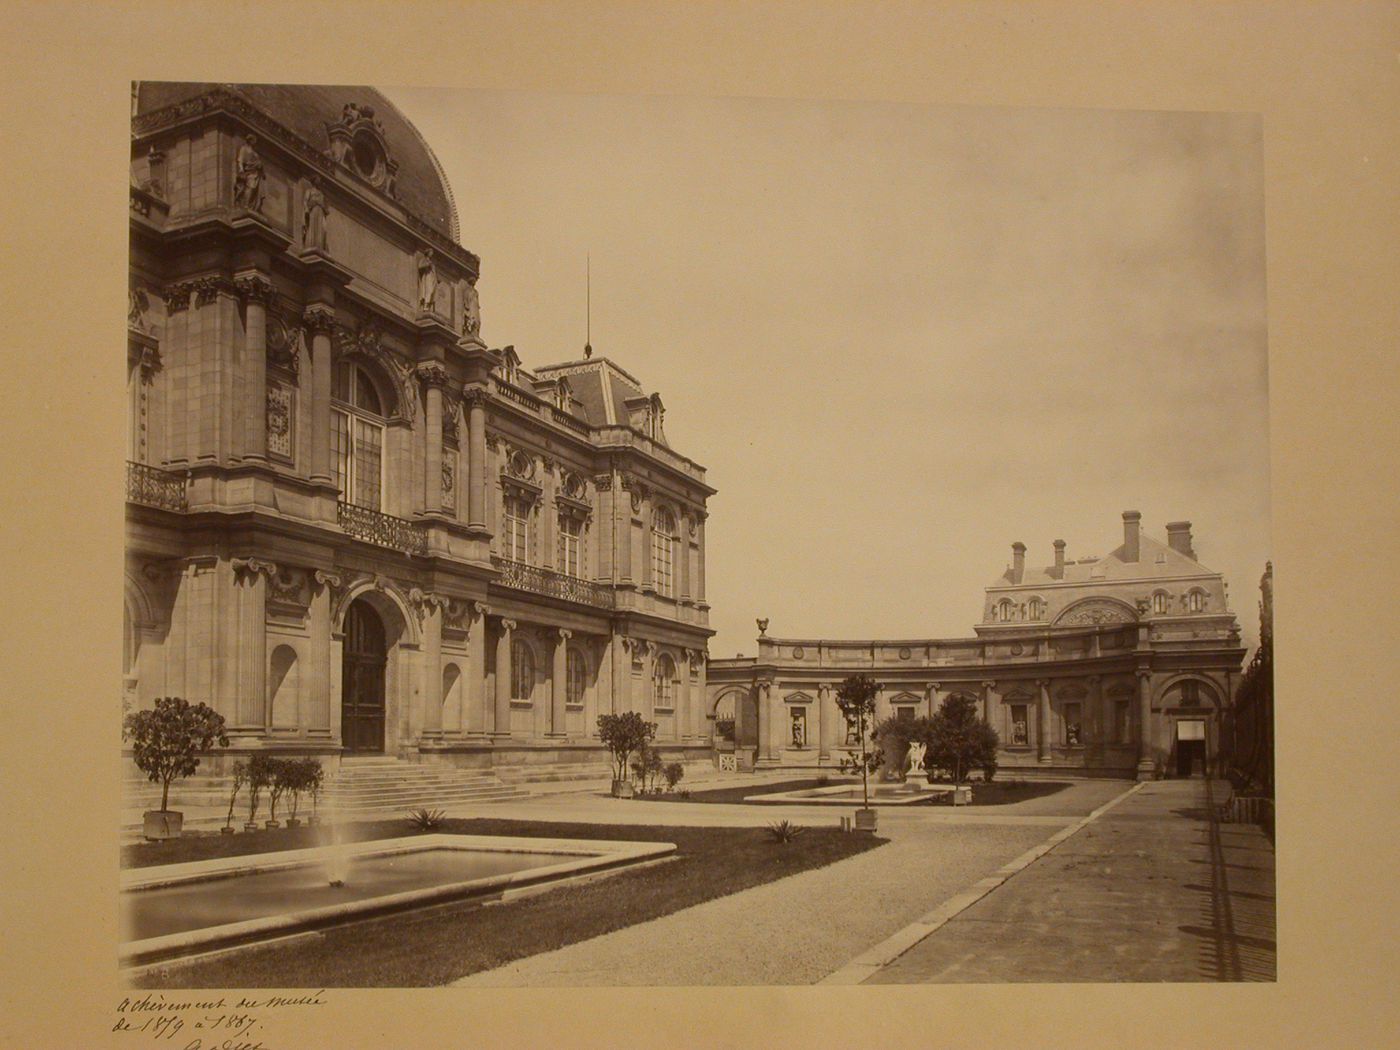 Musée d'Amiens: Overview showing entrance court and fountains, Amiens, France